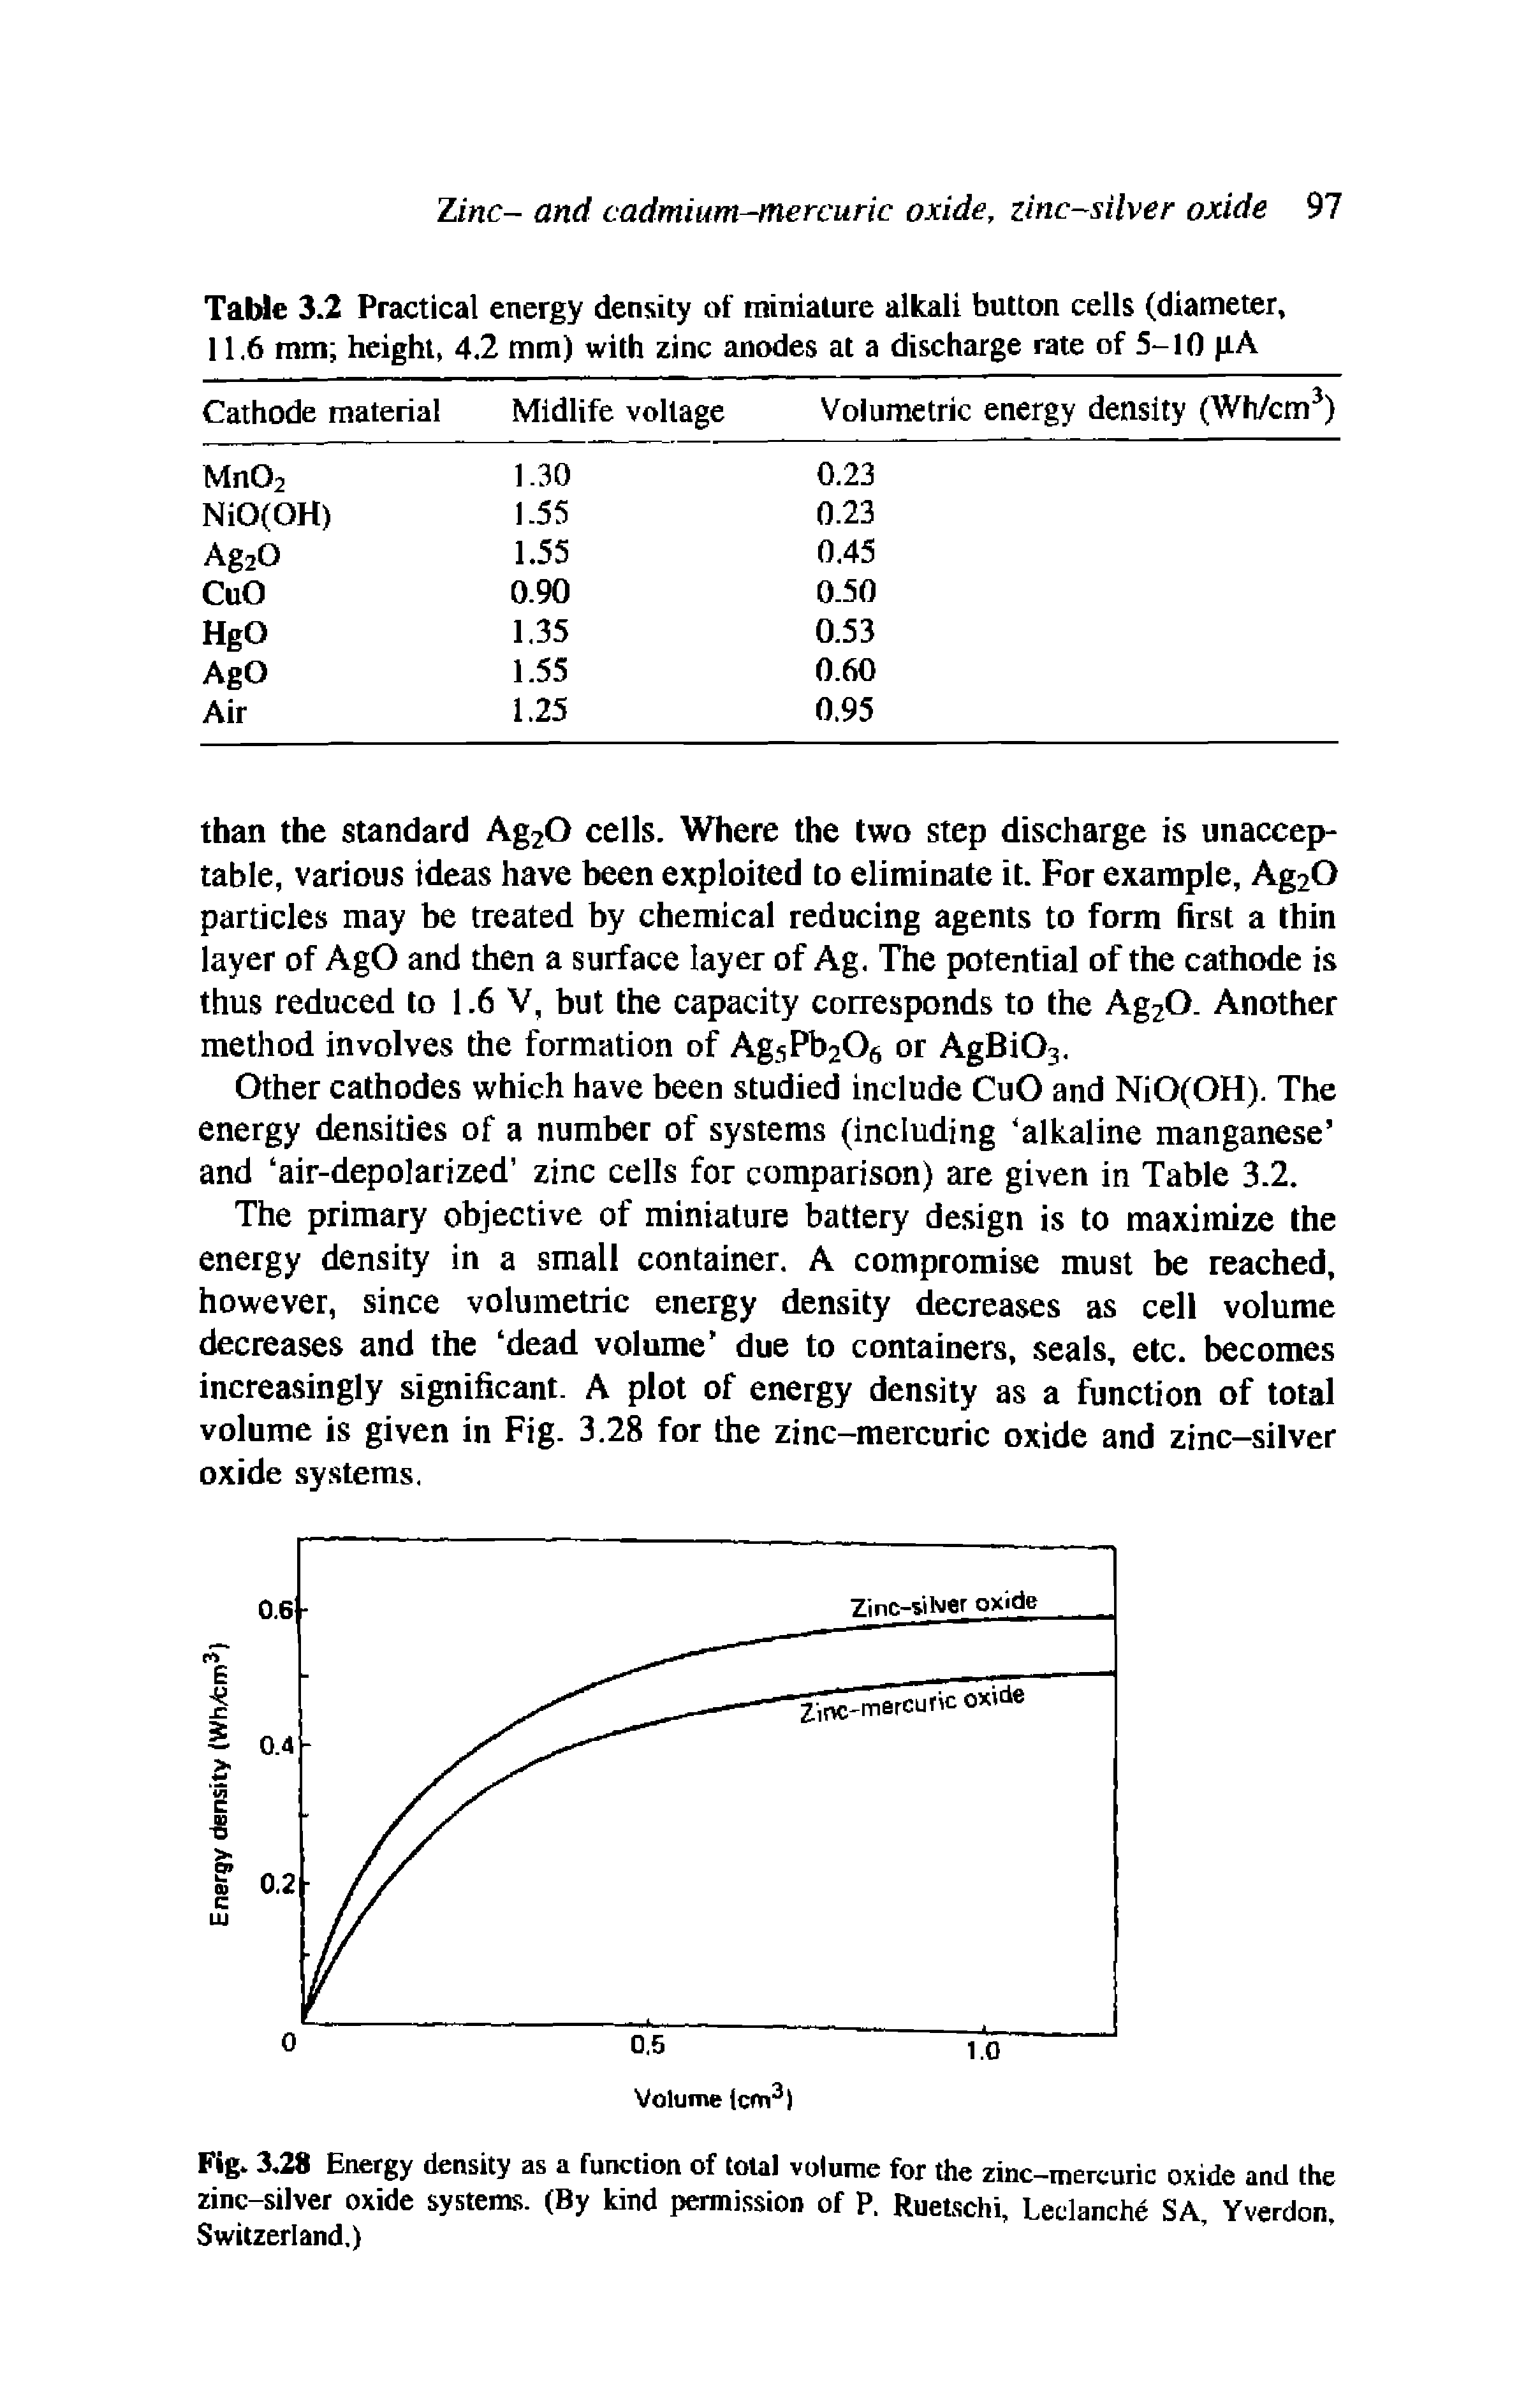 Table 3.2 Practical energy density of miniature alkali button cells (diameter, 11.6 mm height, 4.2 mm) with zinc anodes at a discharge rate of 5-10 pA...